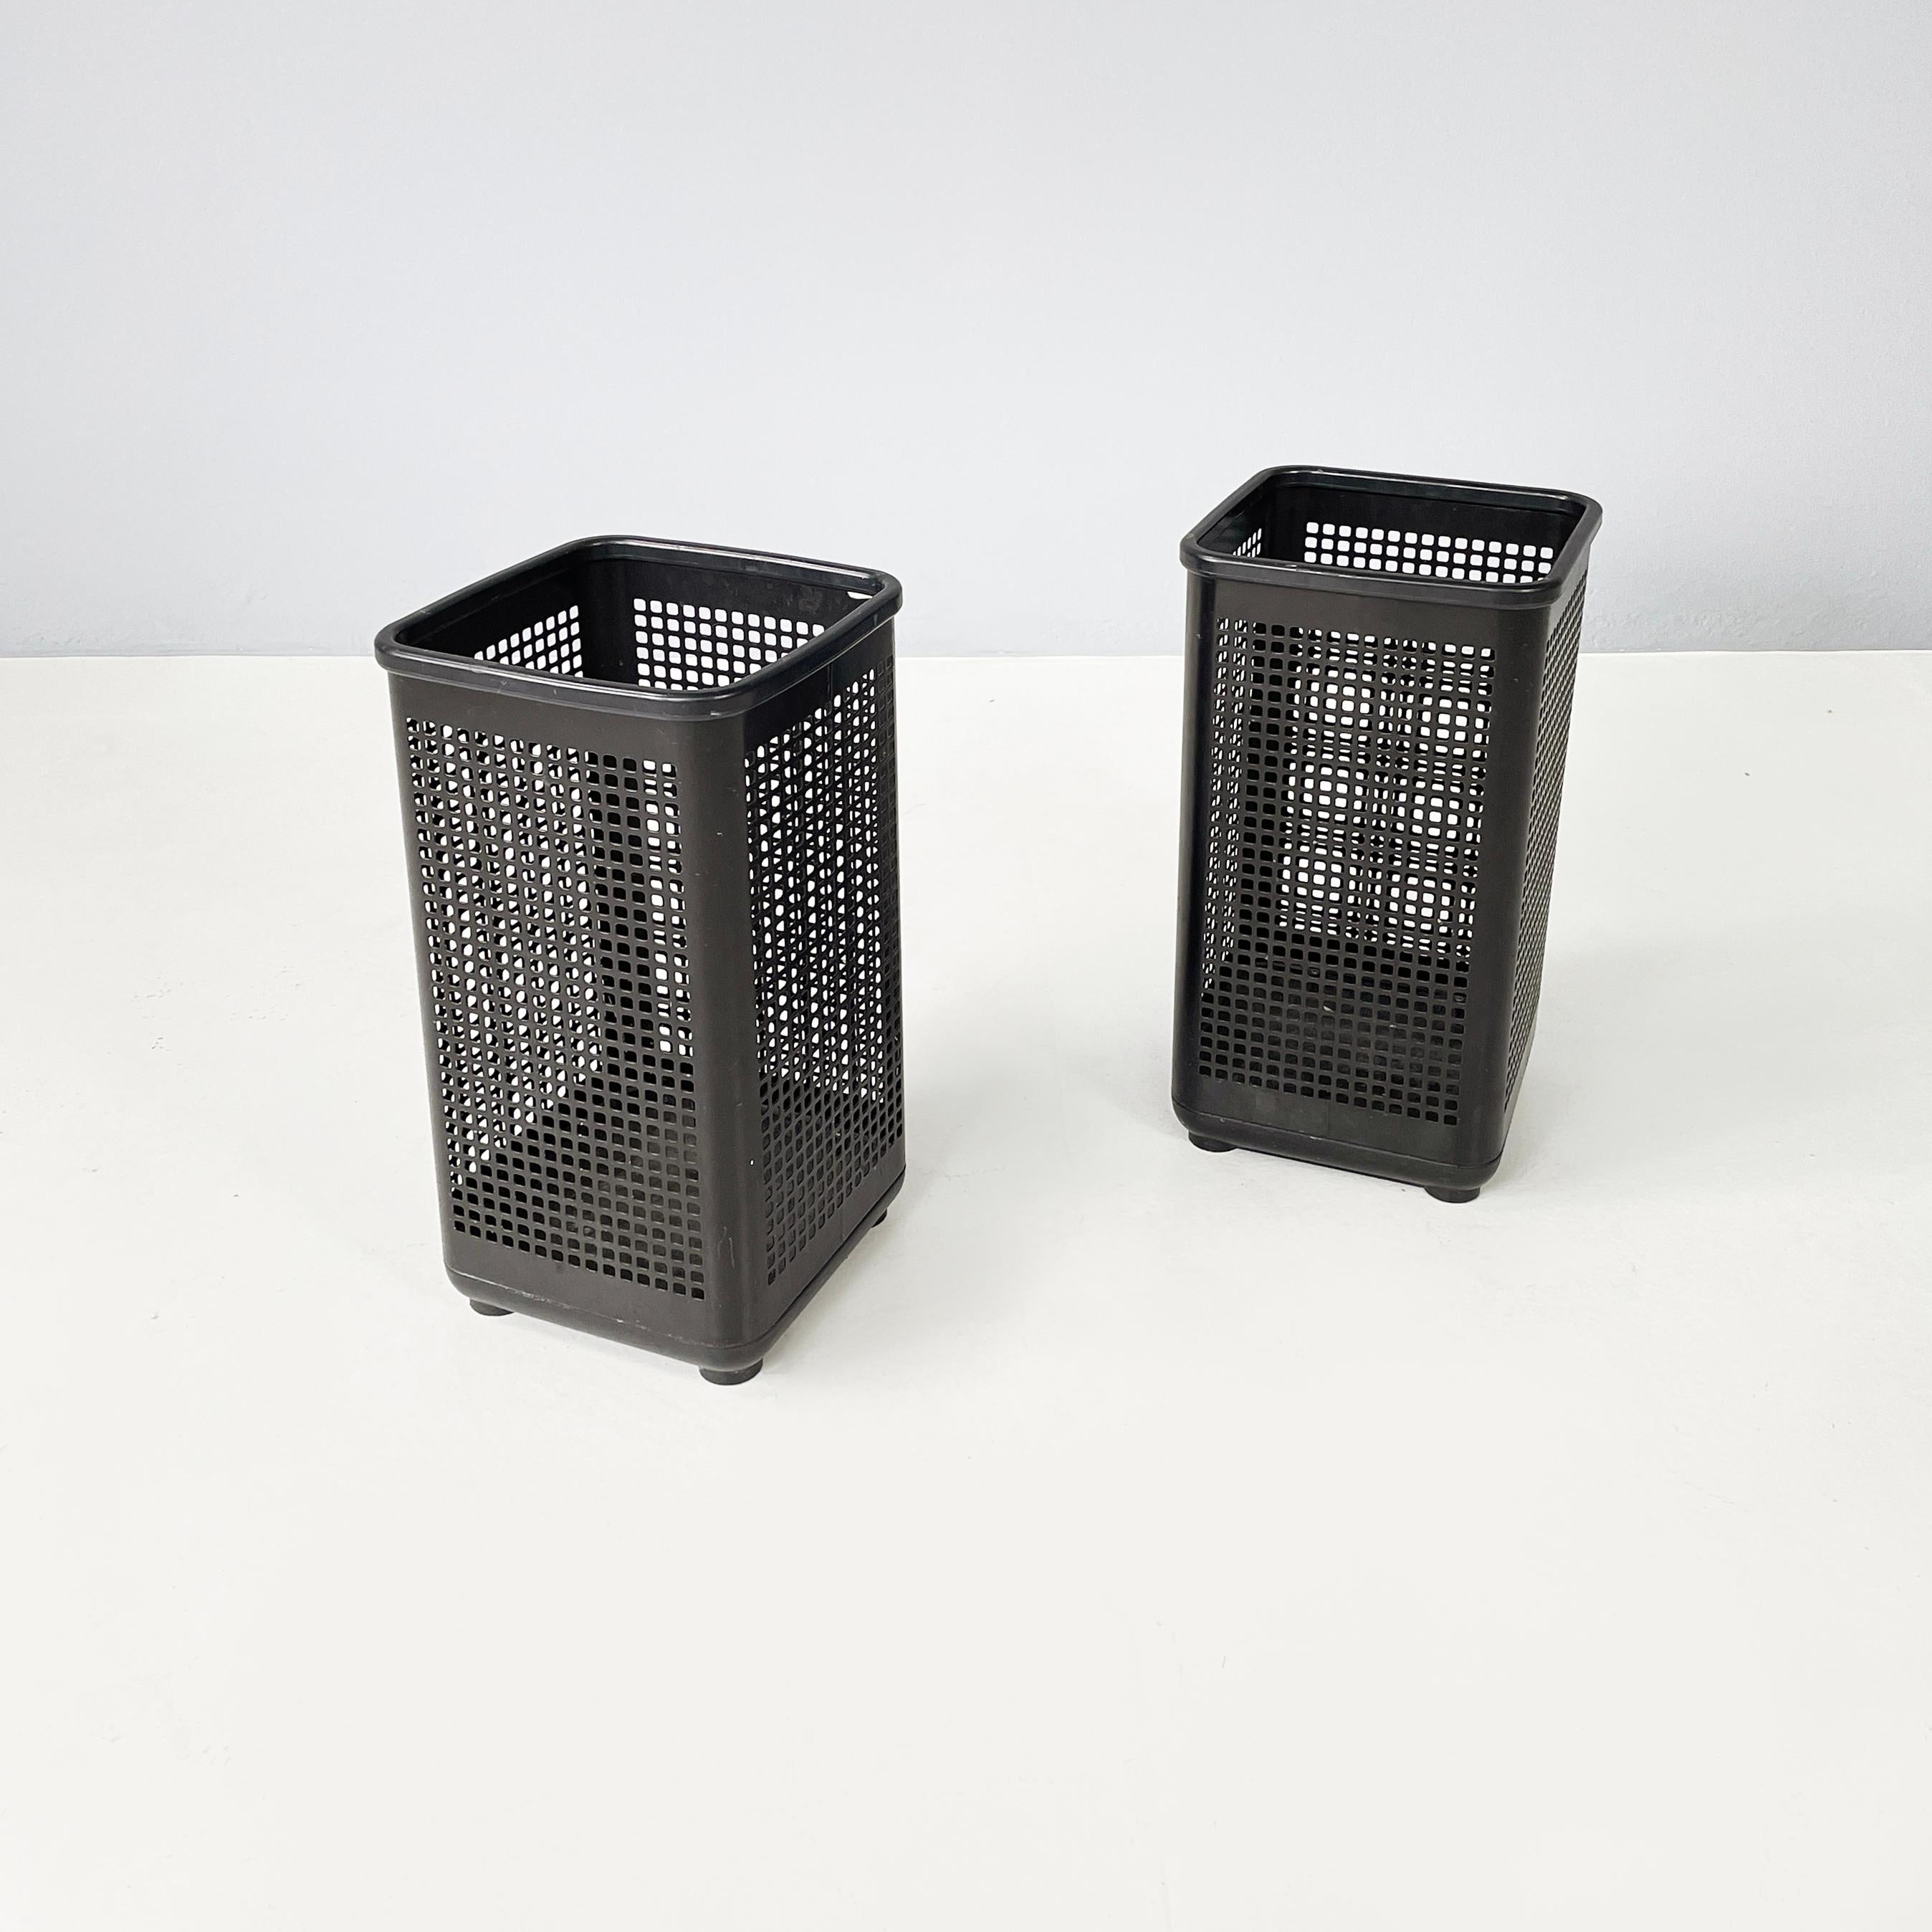 Italian modern Black metal and plastic squared baskets by Neolt, 1980s
Pair of square-based office bins. The main structure is made of a perforated metal sheet with square holes, and is painted black with a matte finish. The top and base with round